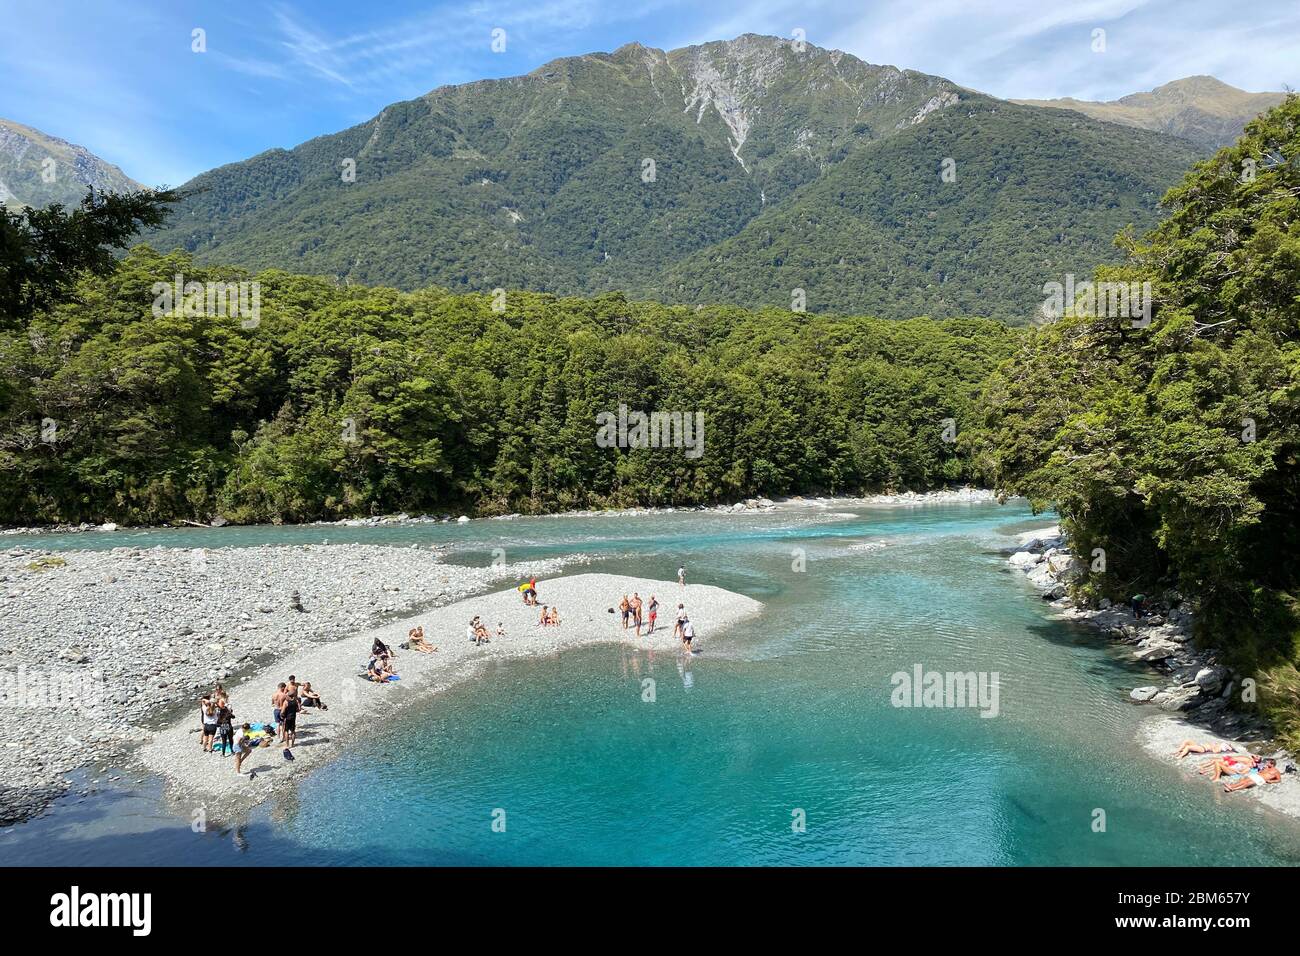 Clear, turquoise blue pools in the Makarora River in Mount Aspiring National Park, New Zealand Stock Photo